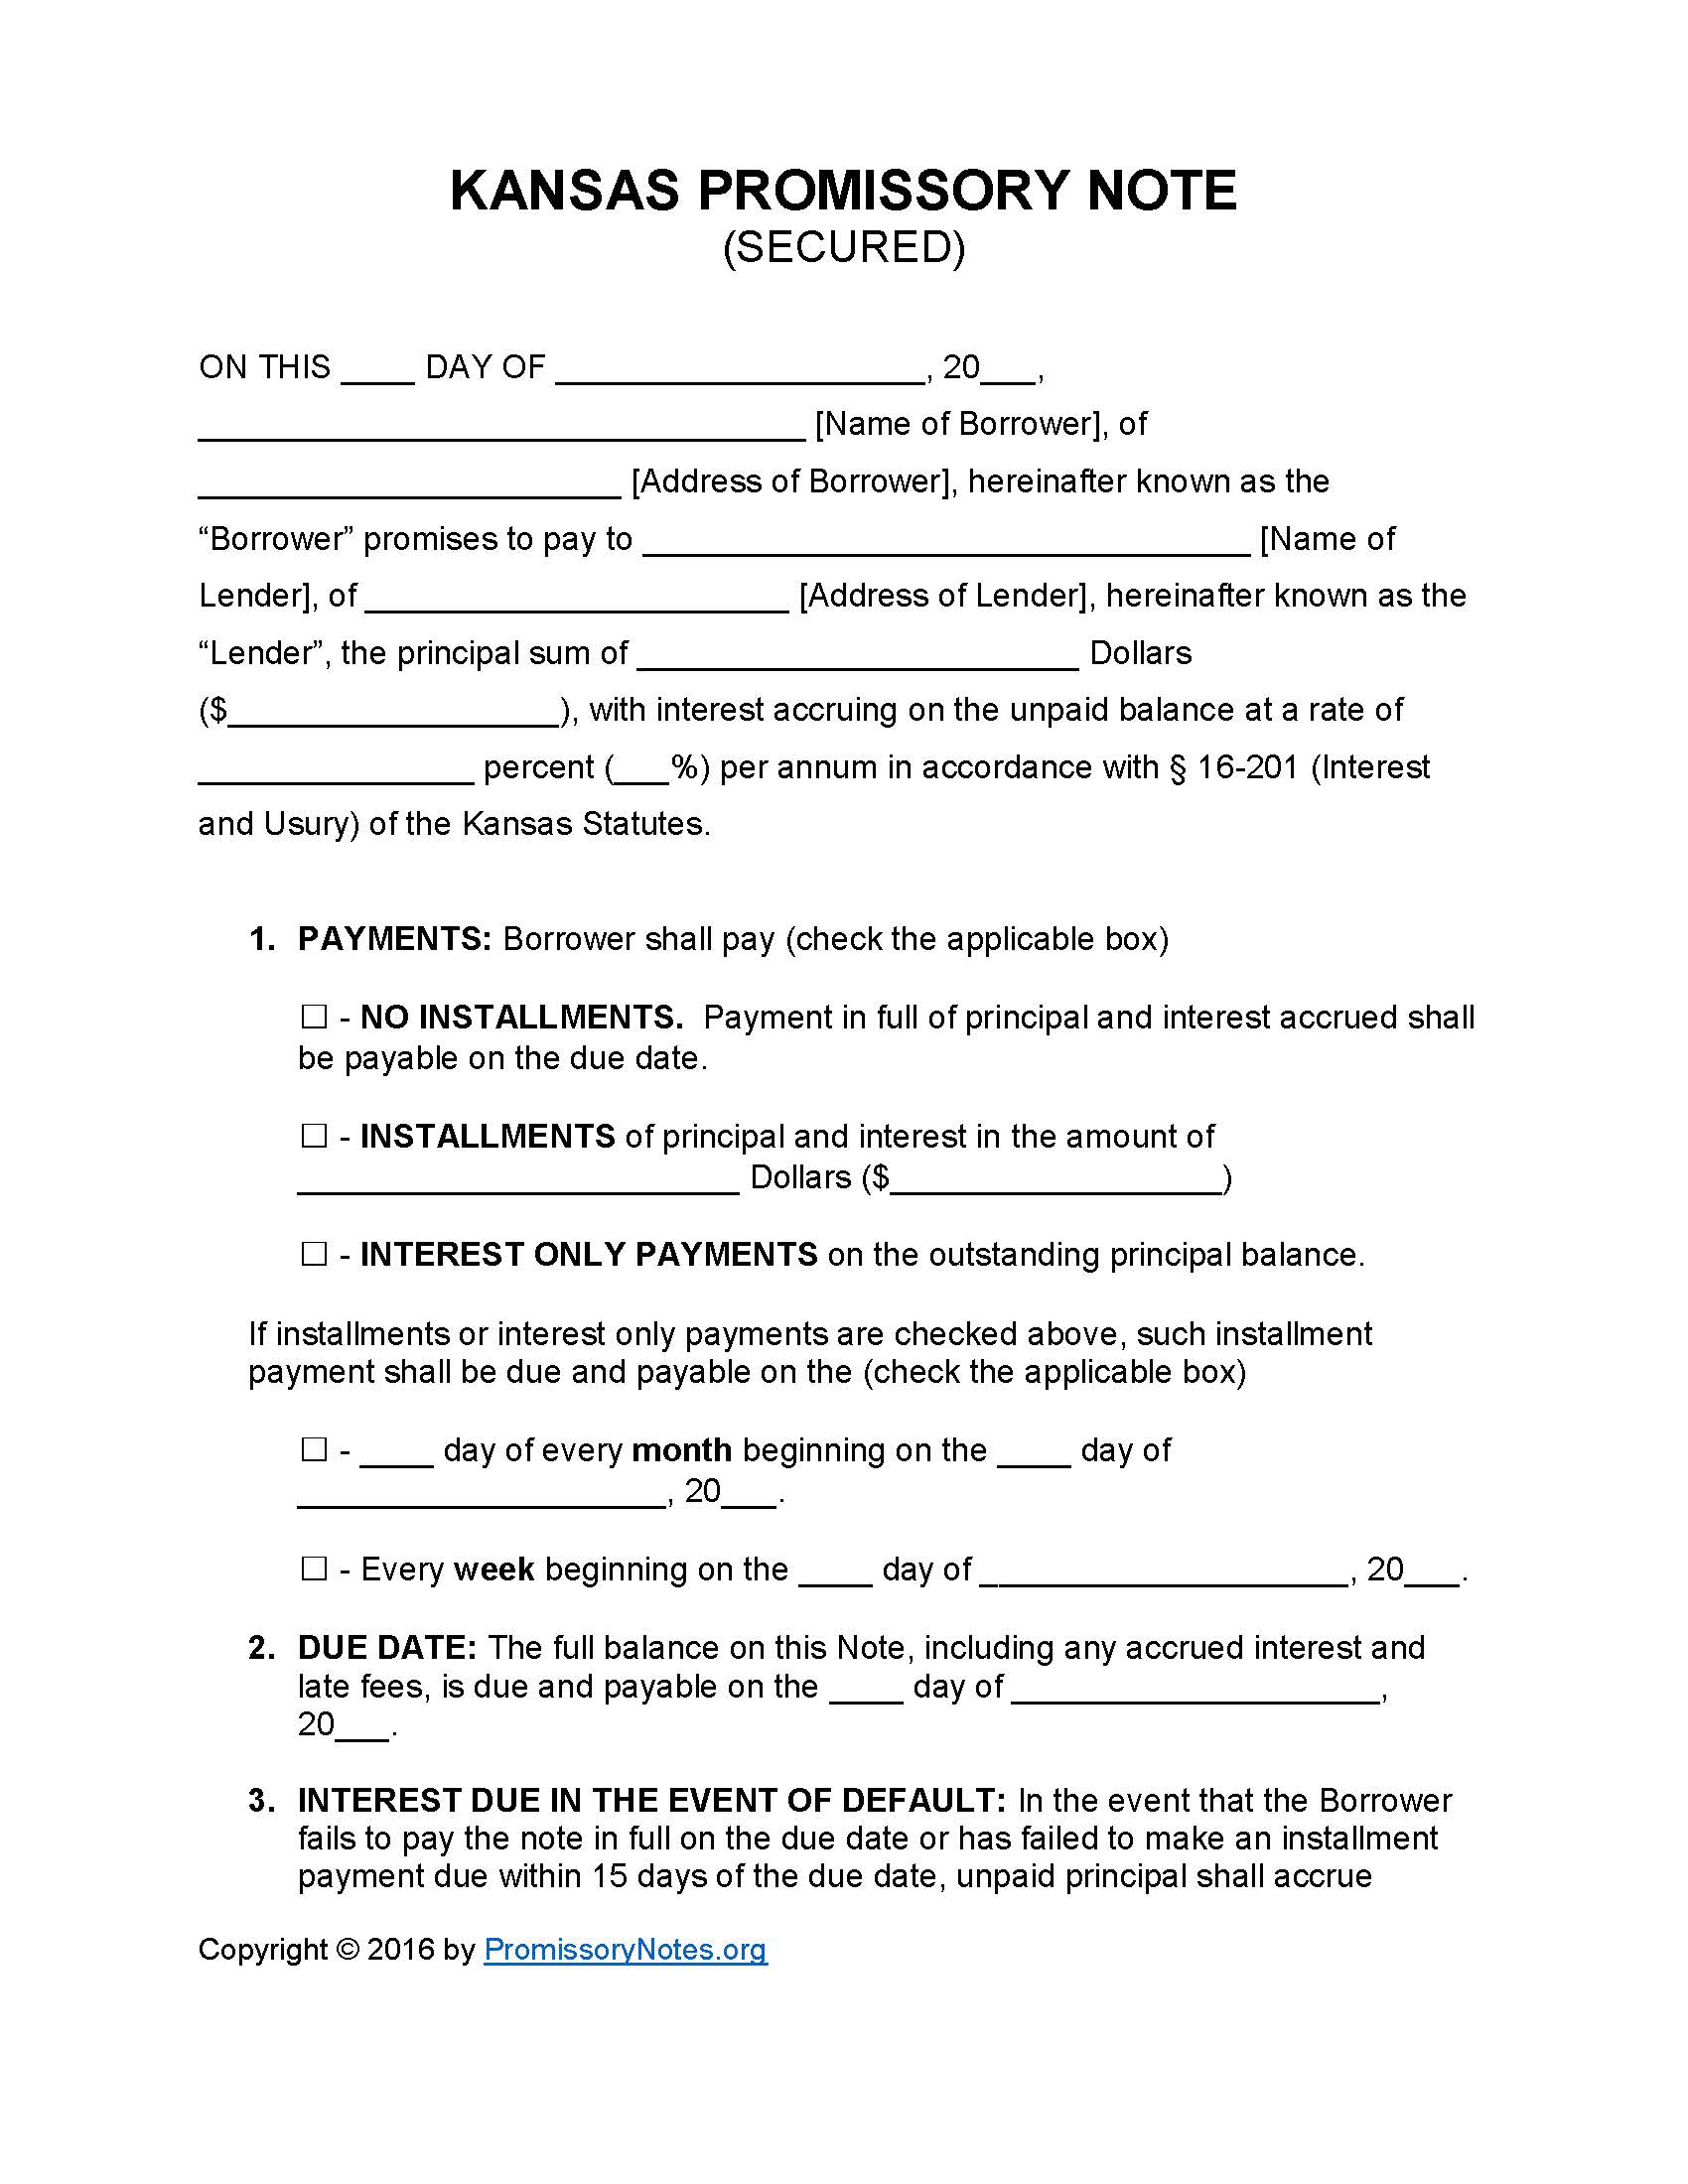 kansas-secured-promissory-note-form